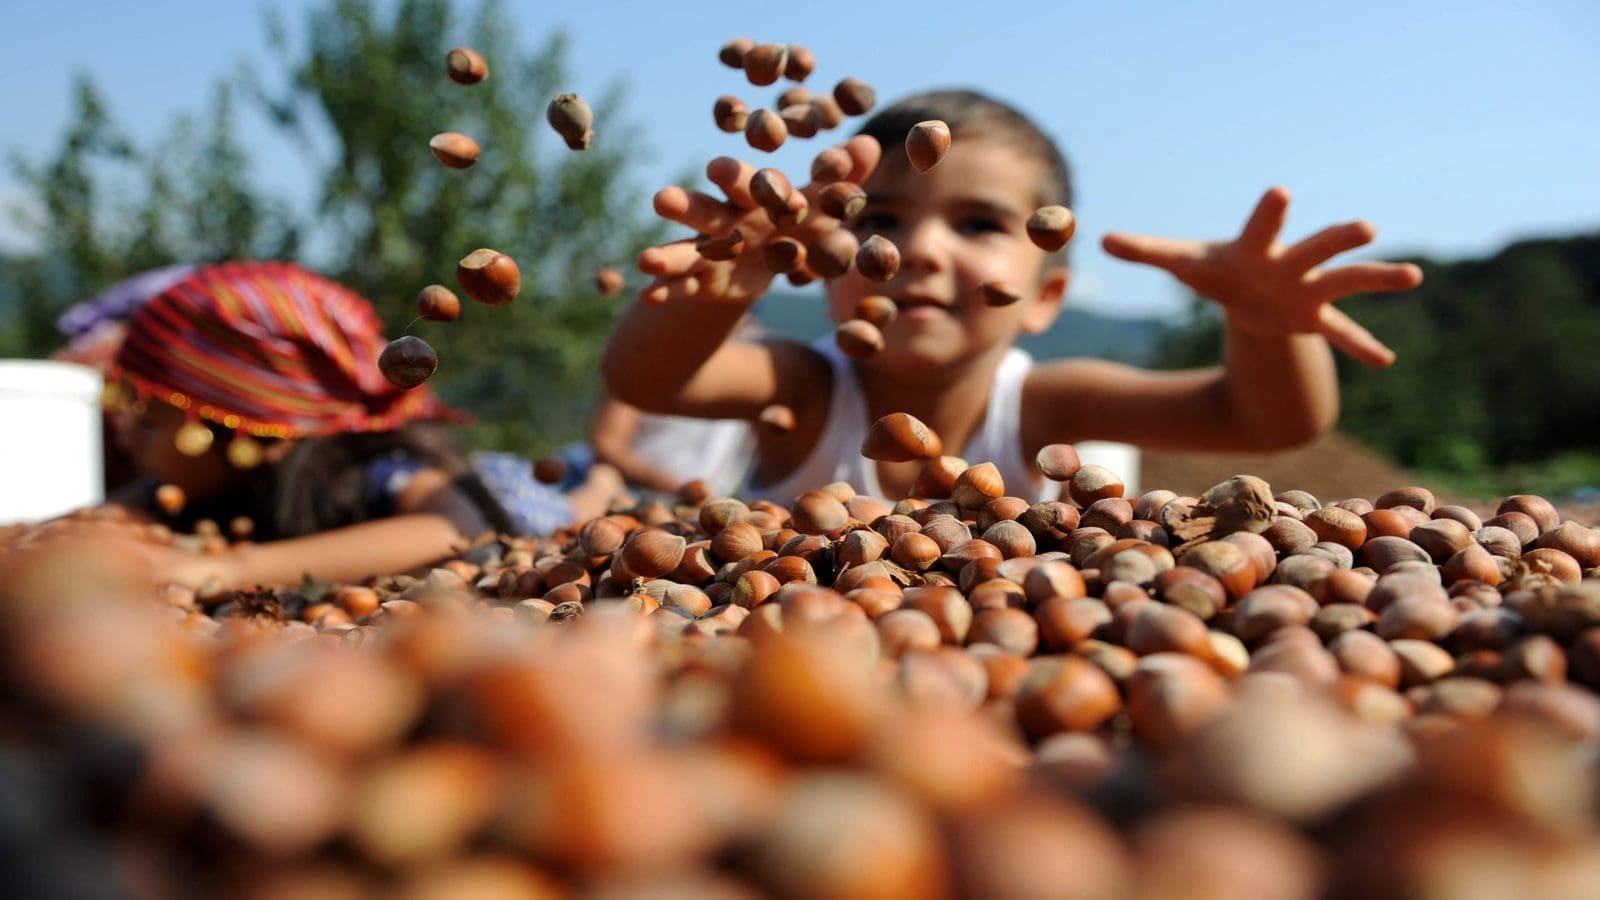 Olam Food Ingredients launches campaign to enhance sustainability in hazelnut supply chain